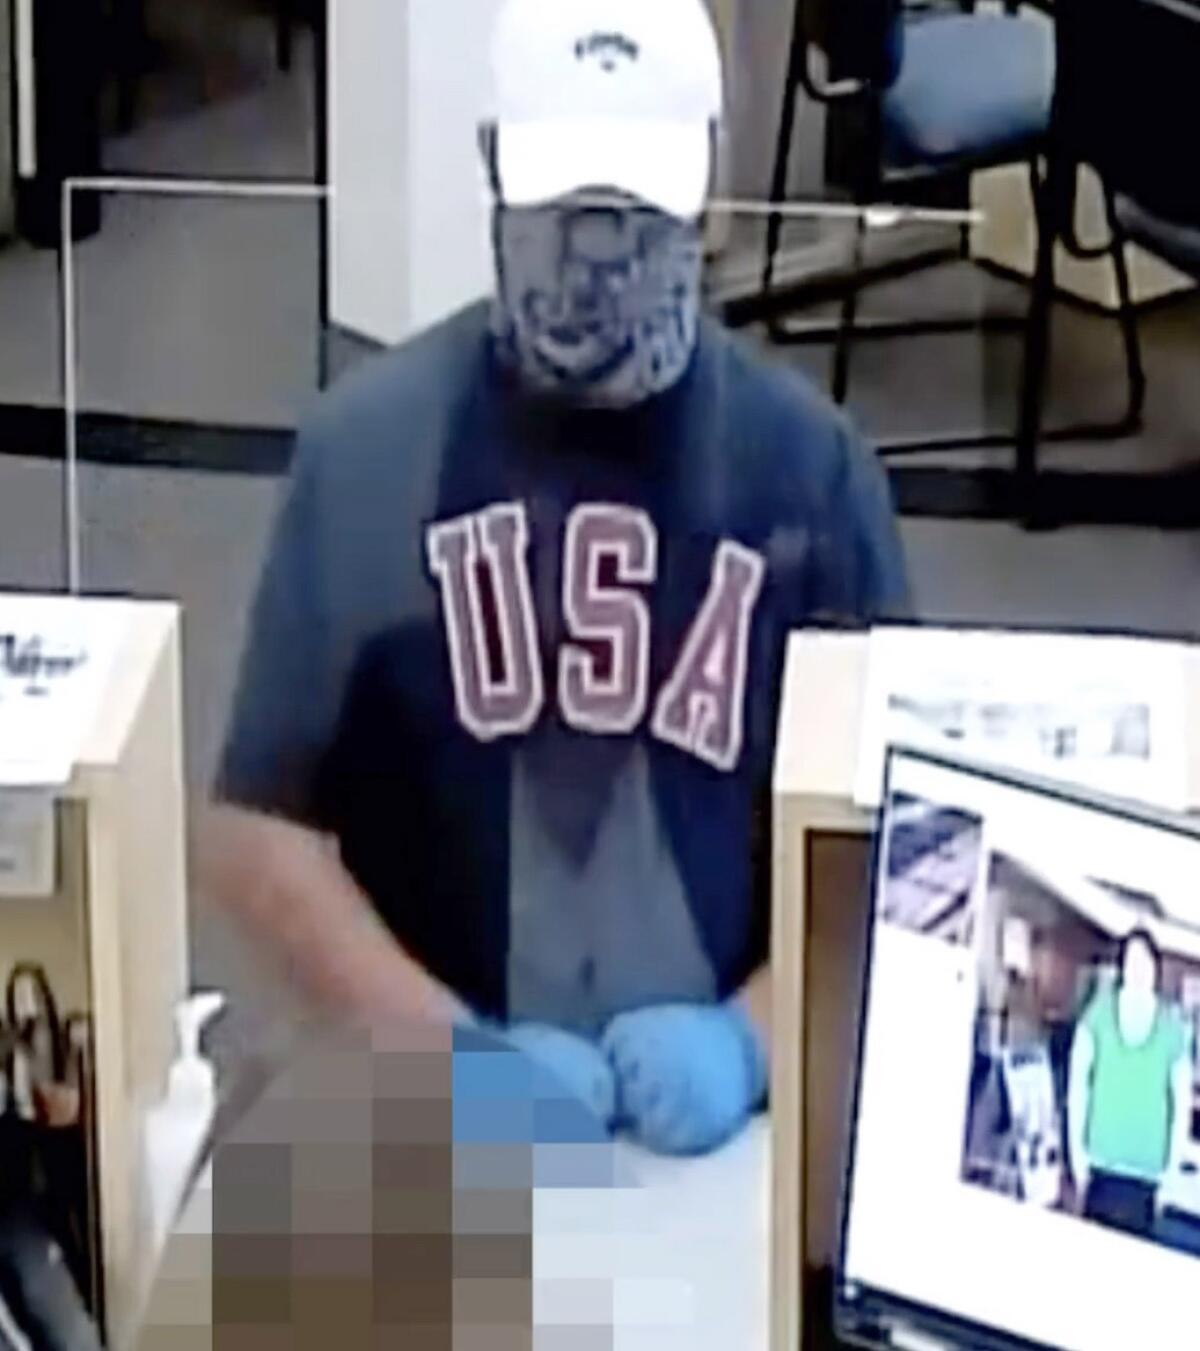 On April 2, 2024, a man entered the U.S. Bank on Barranca Parkway in Irvine and demanded money from a bank teller.